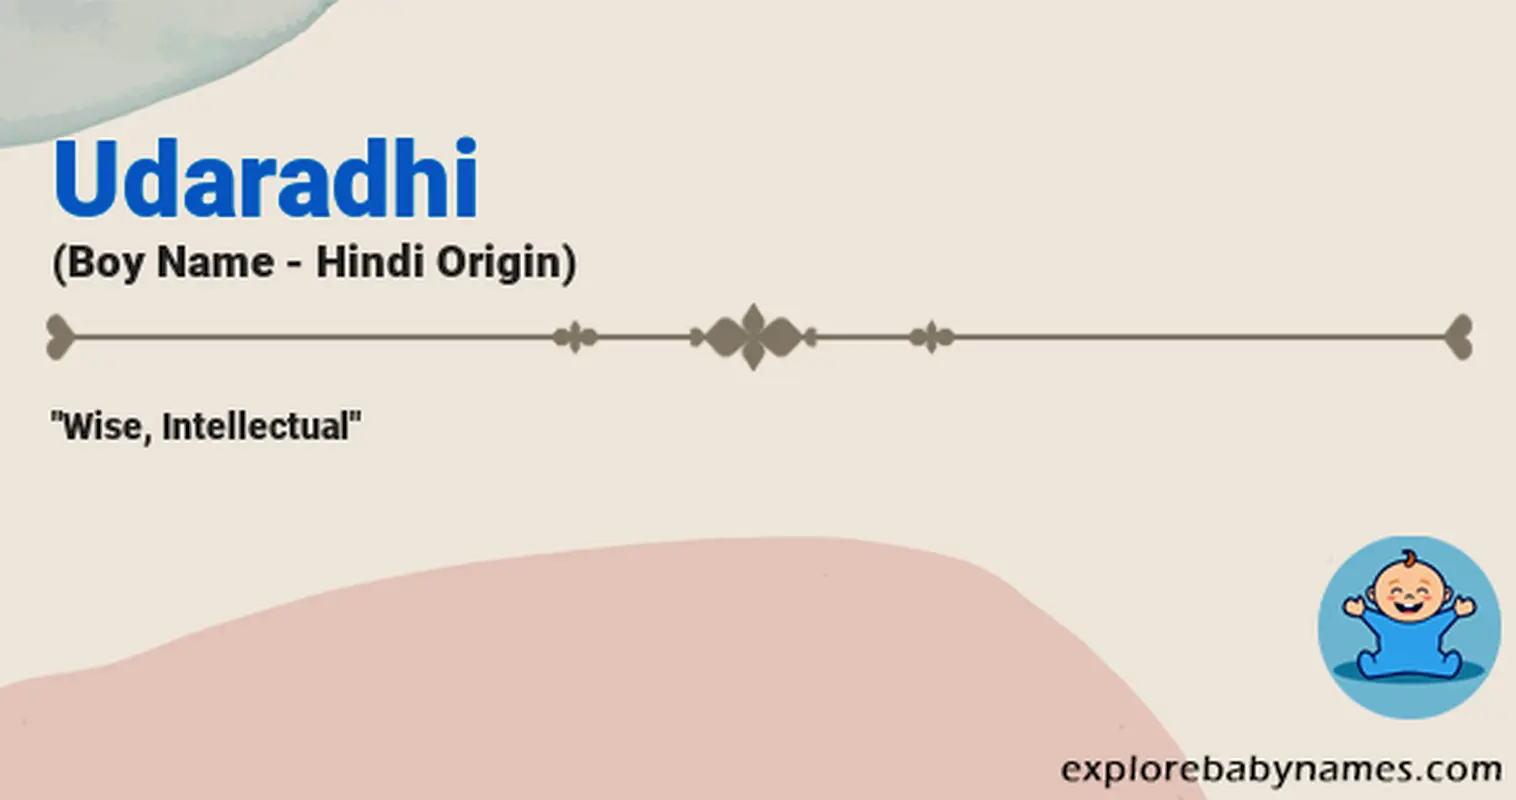 Meaning of Udaradhi